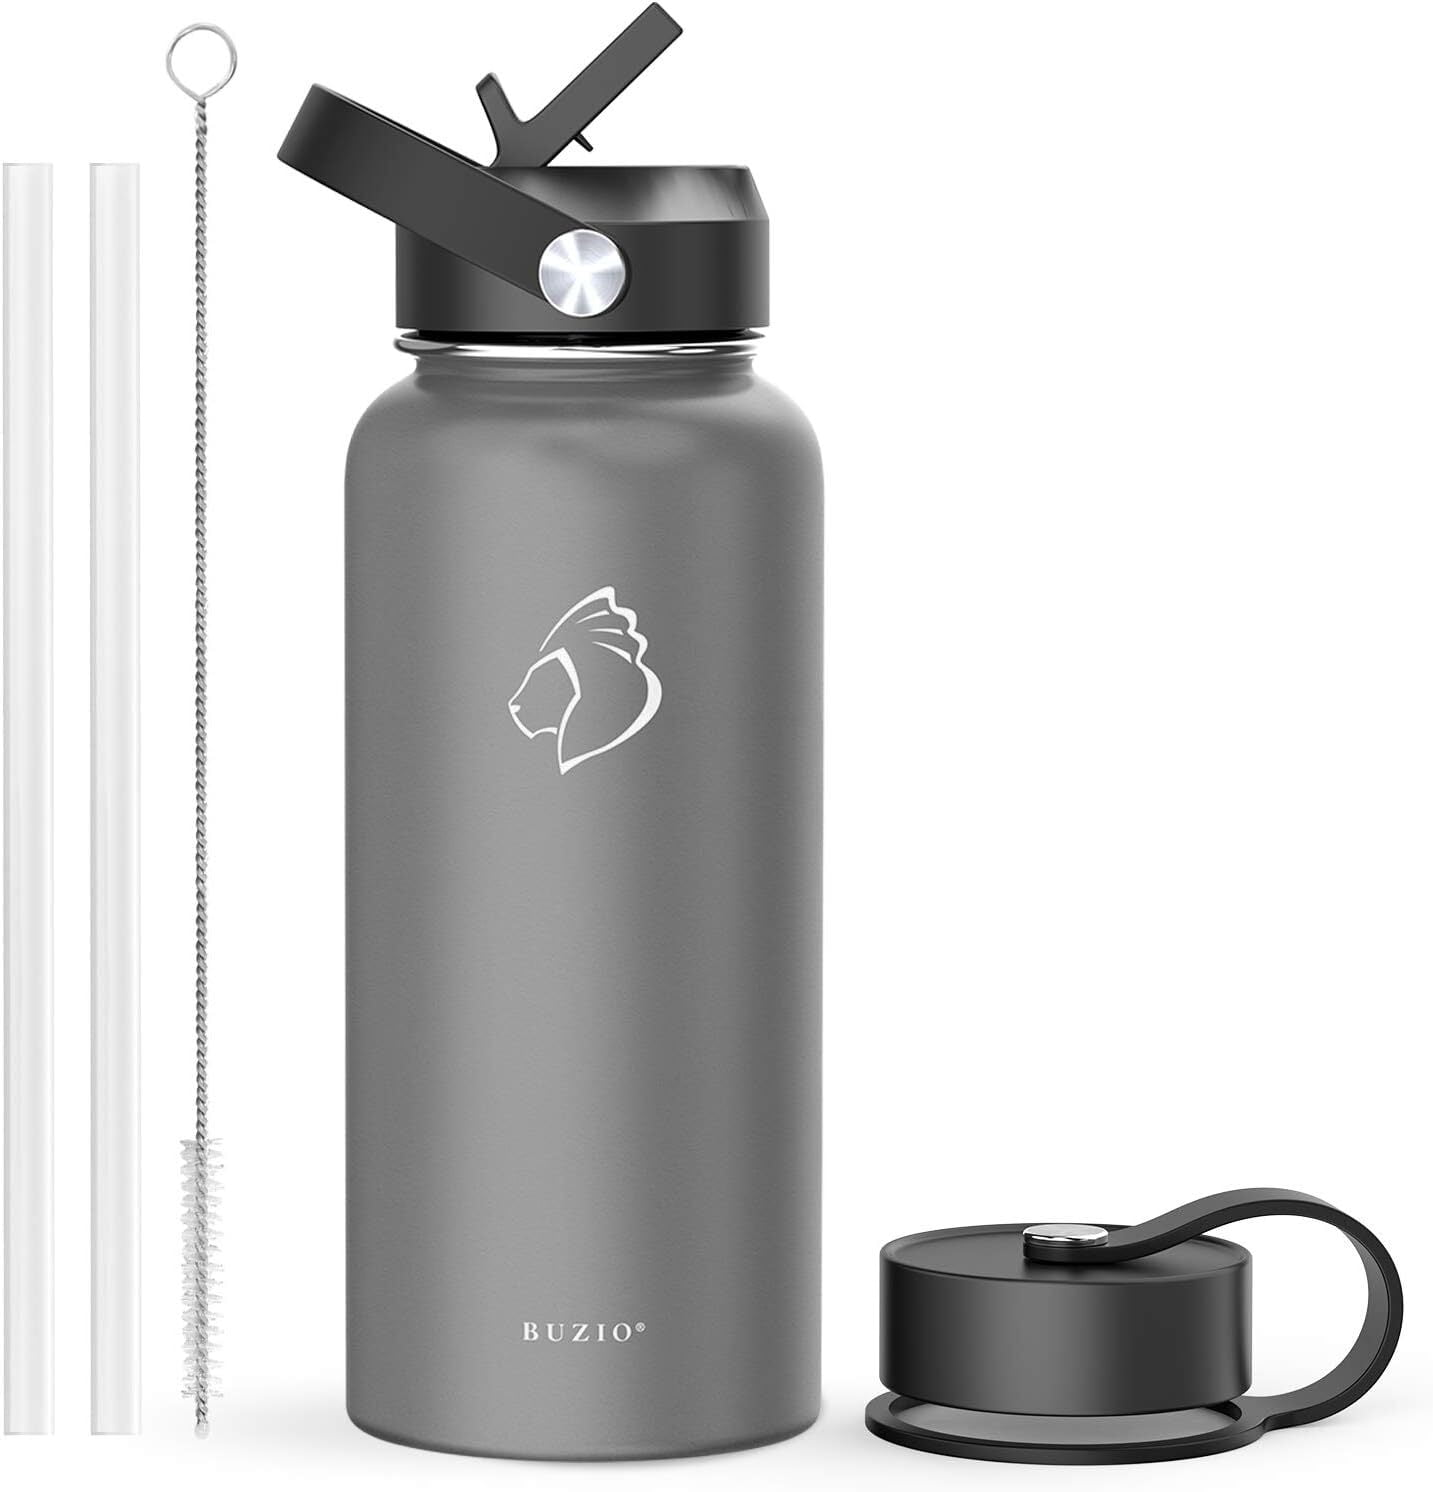 Buzio - Duet Series Insulated 64 oz Water Bottle with Straw Lid and Flex Lid - Gray